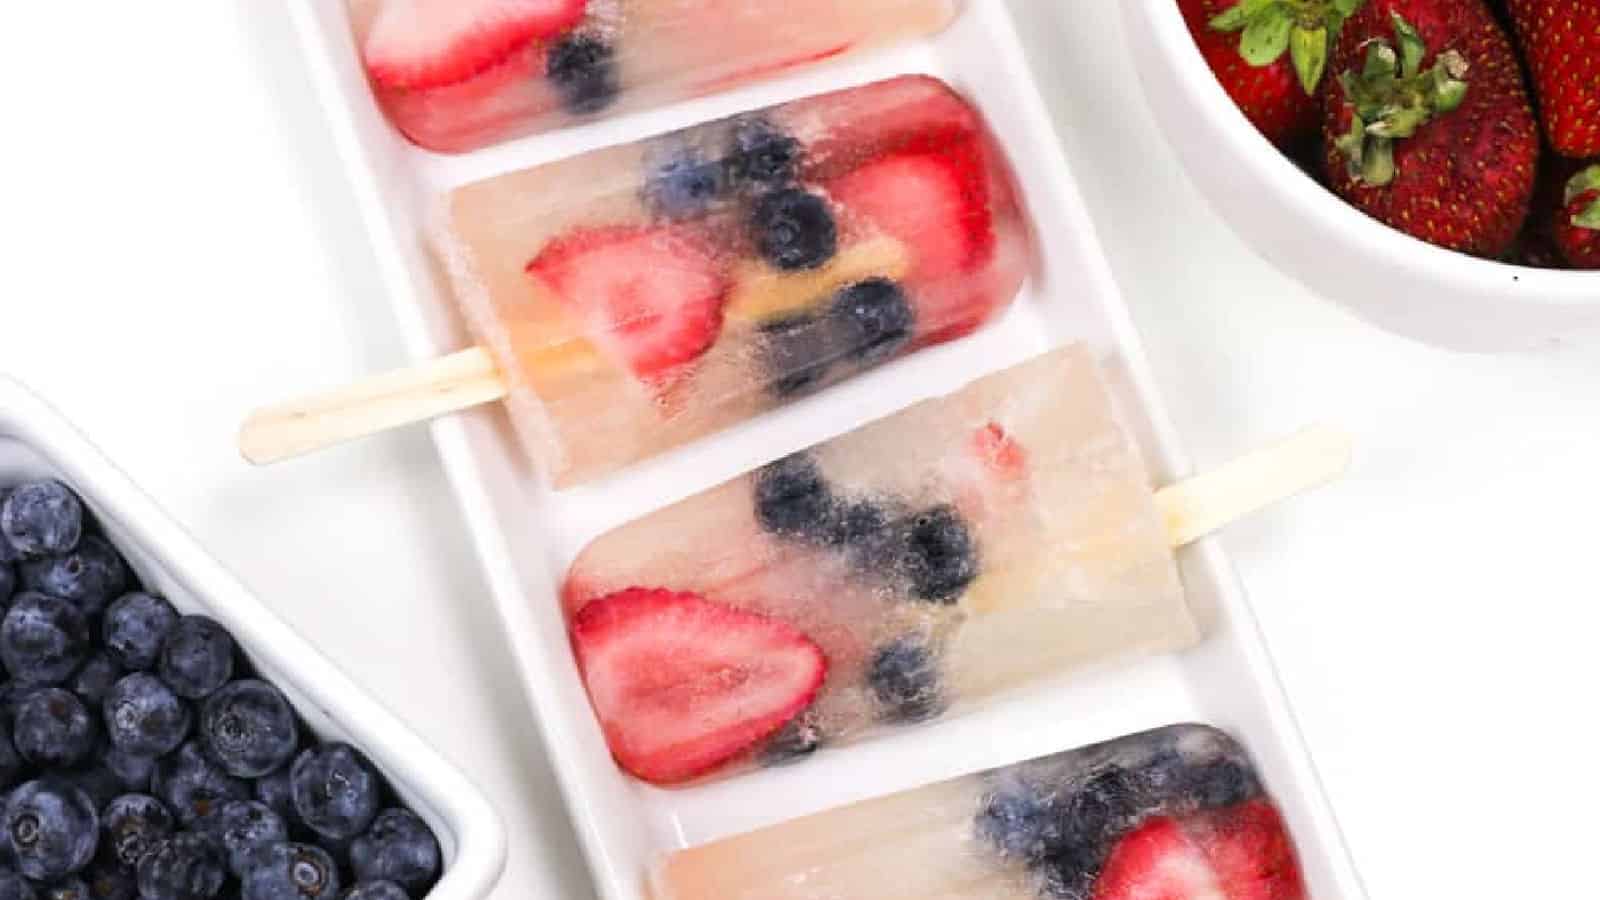 prosecco popsicles with strawberries and blueberries on a white ceramic tray next to bowls of fresh berries.